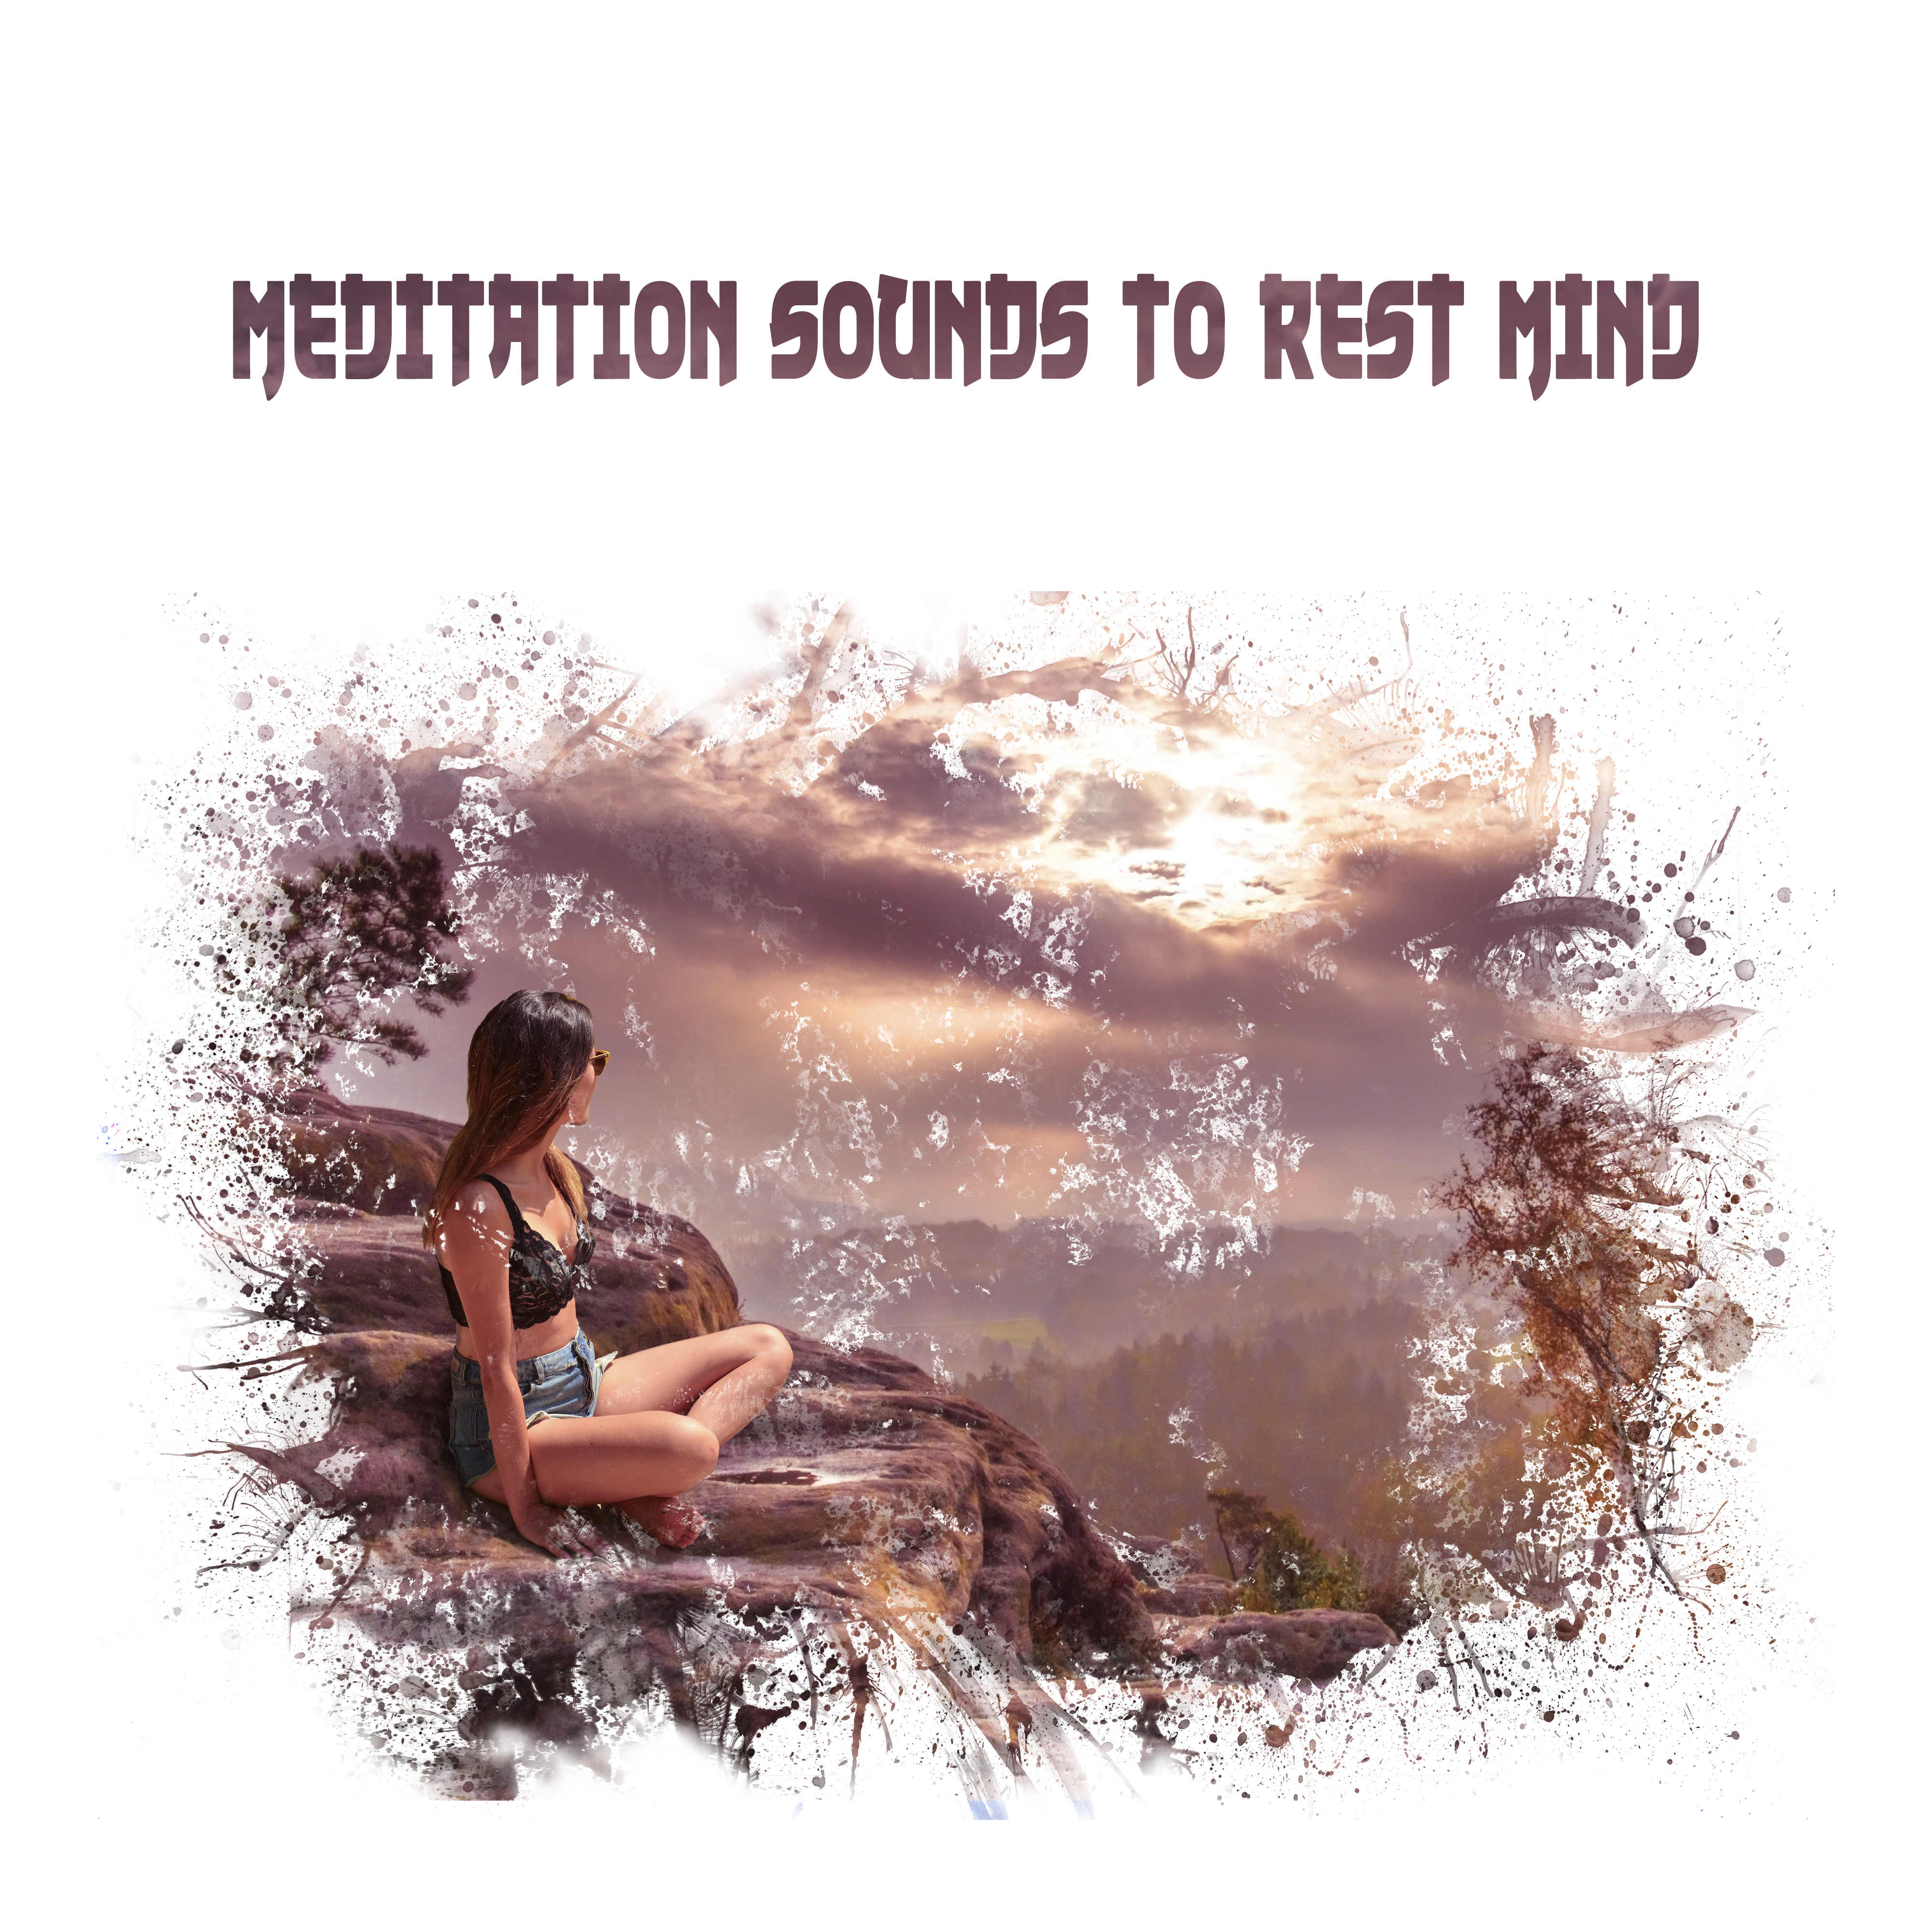 Meditation Sounds to Rest Mind – Calming Mind Sounds, Meditation & Relaxation, Easy Listening, Stress Relief